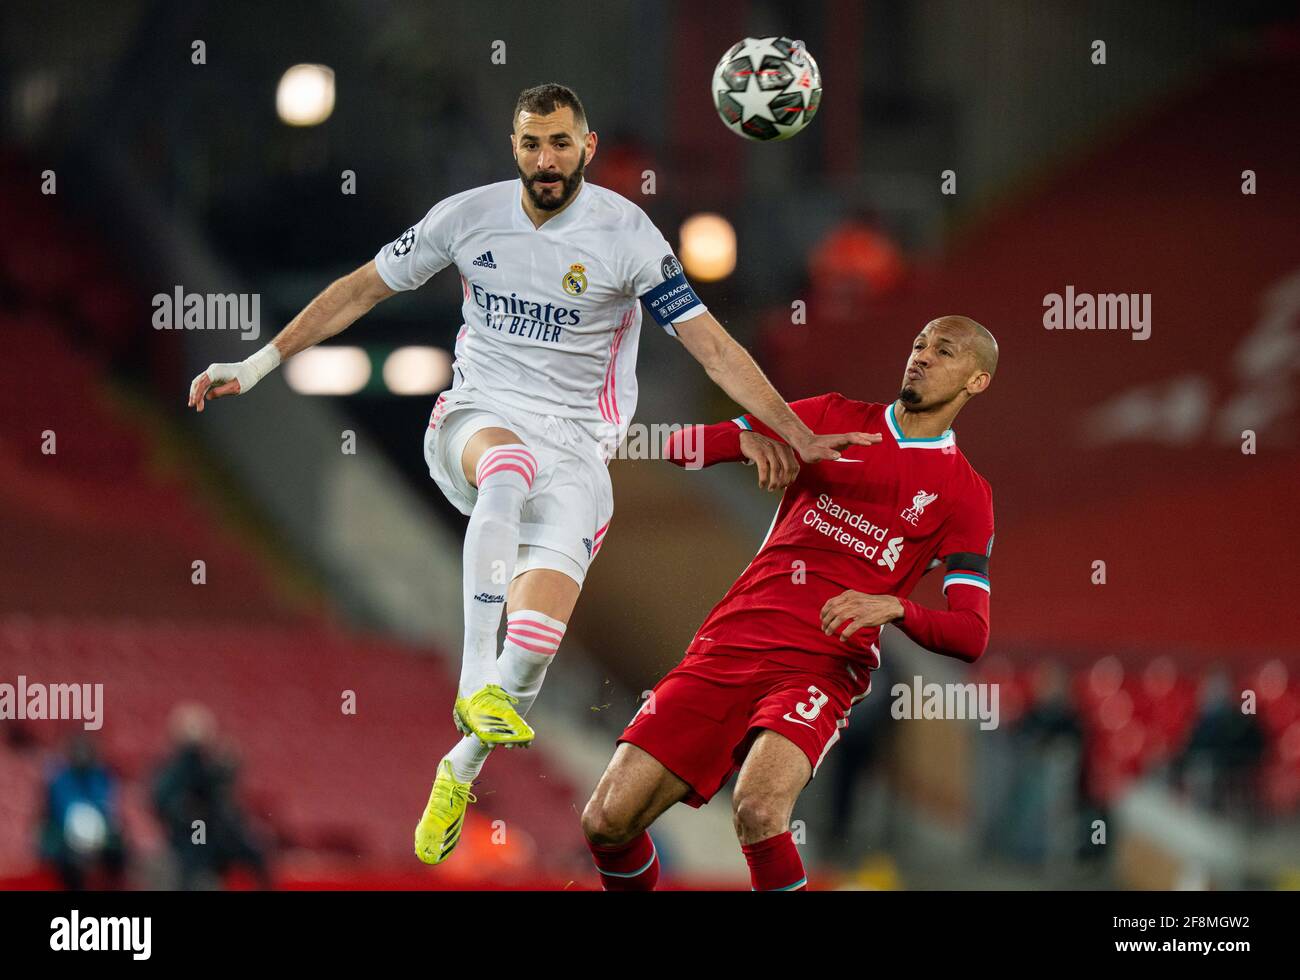 Liverpool. 15th Apr, 2021. Real Madrid's Karim Benzema (L) is challenged by  Liverpool's Fabinho during the UEFA Champions League quarterfinal 2nd Leg  match between Liverpool and Real Madrid at Anfield in Liverpool,